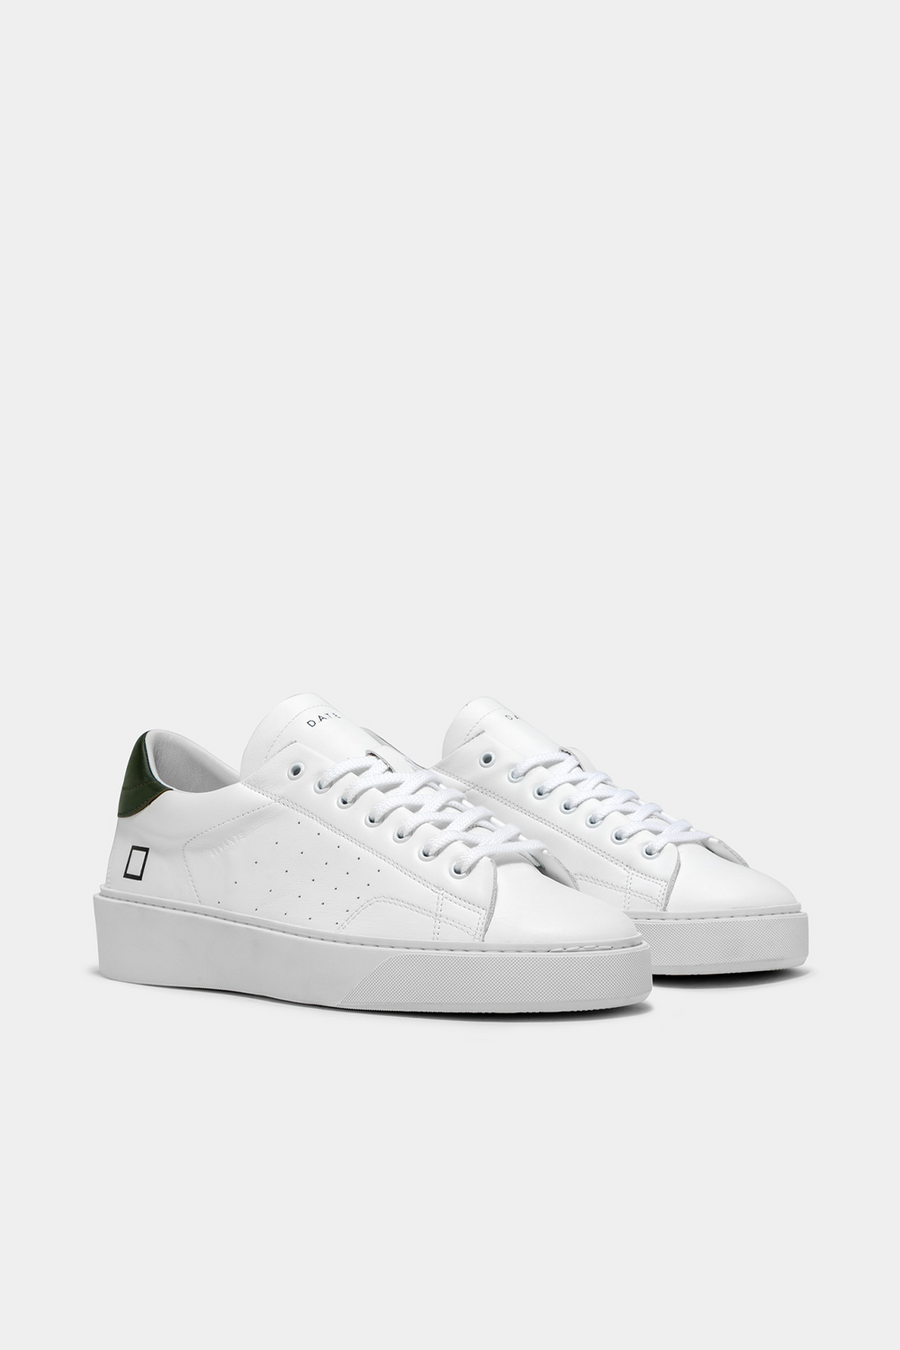 Buy the D.A.T.E. Levante Calf Sneaker in White/Green at Intro. Spend £50 for free UK delivery. Official stockists. We ship worldwide.